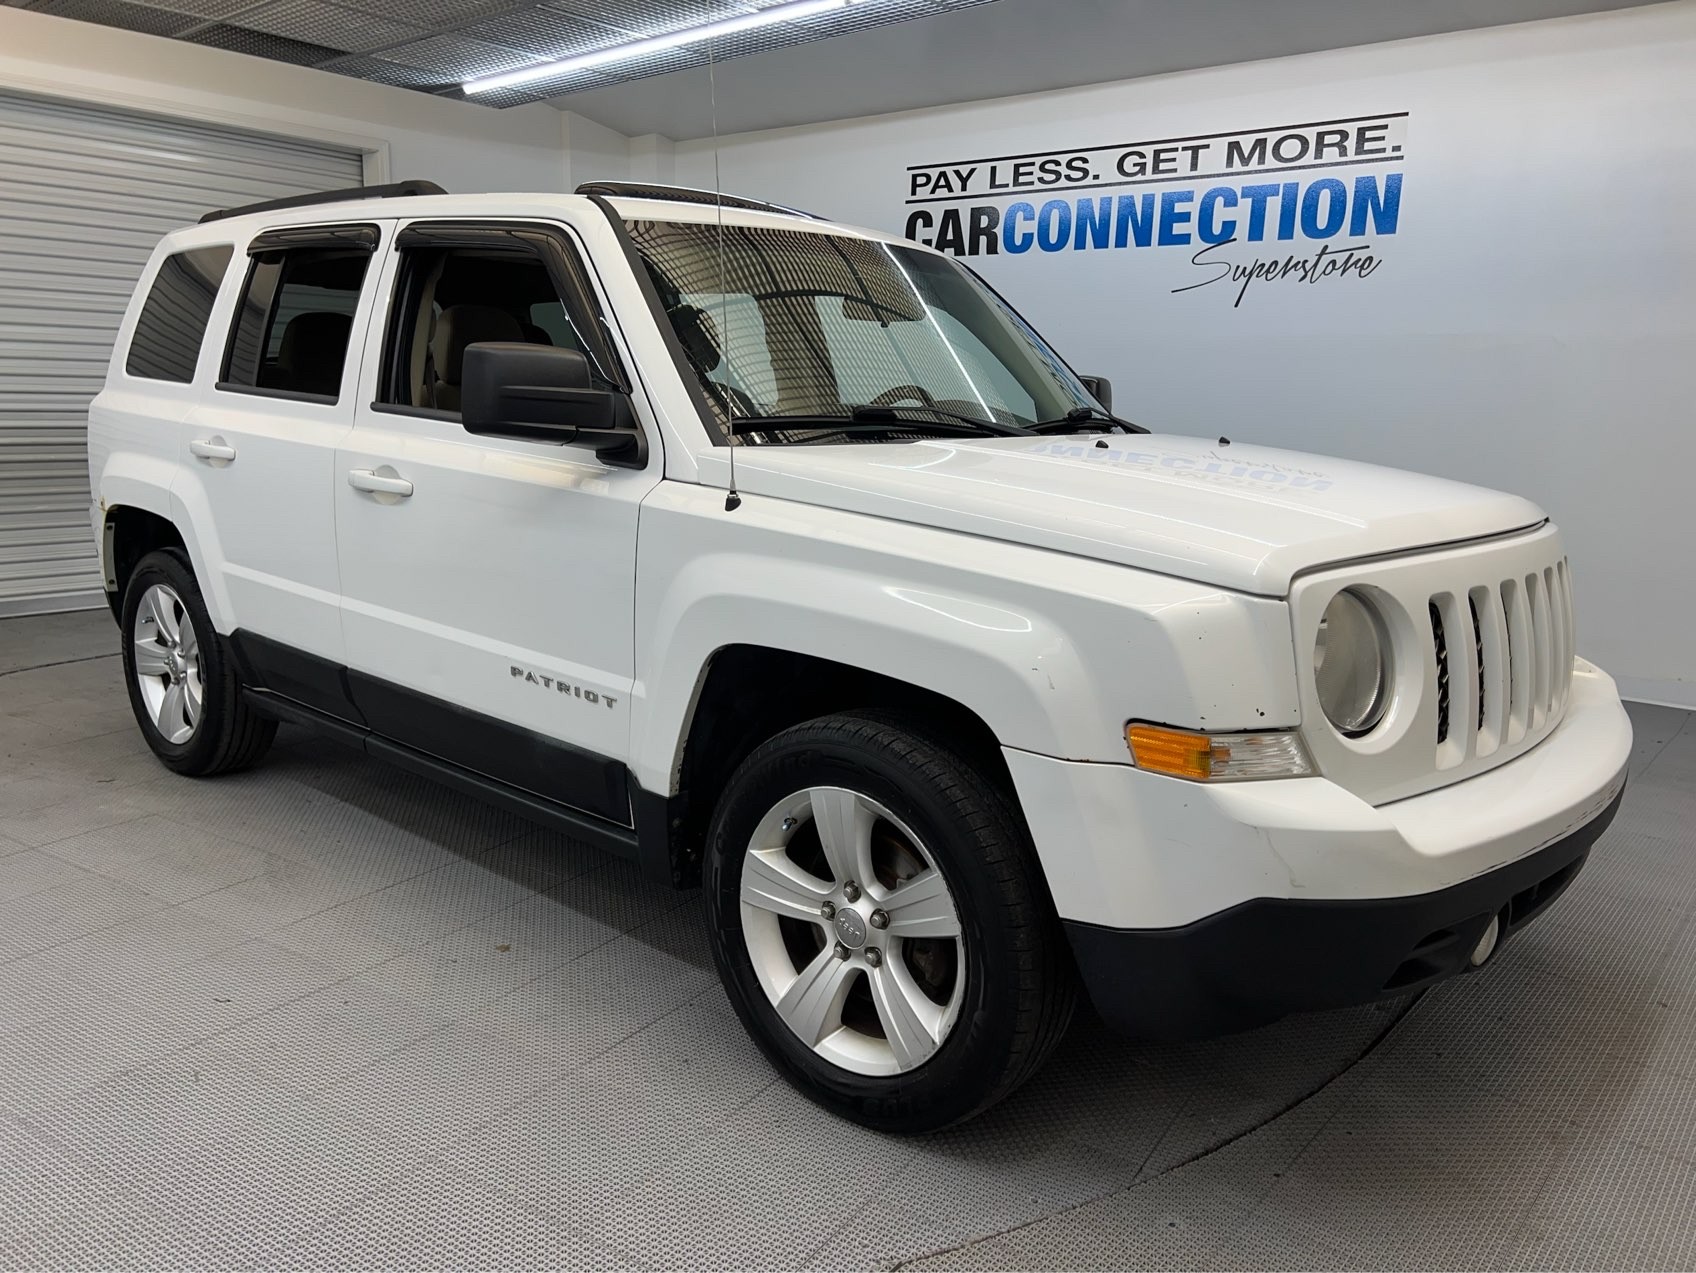 Used 2011 JEEP PATRIOT LATITUDE for sale in CAR CONNECTION INC. | 28225 |  Car Connection Superstore